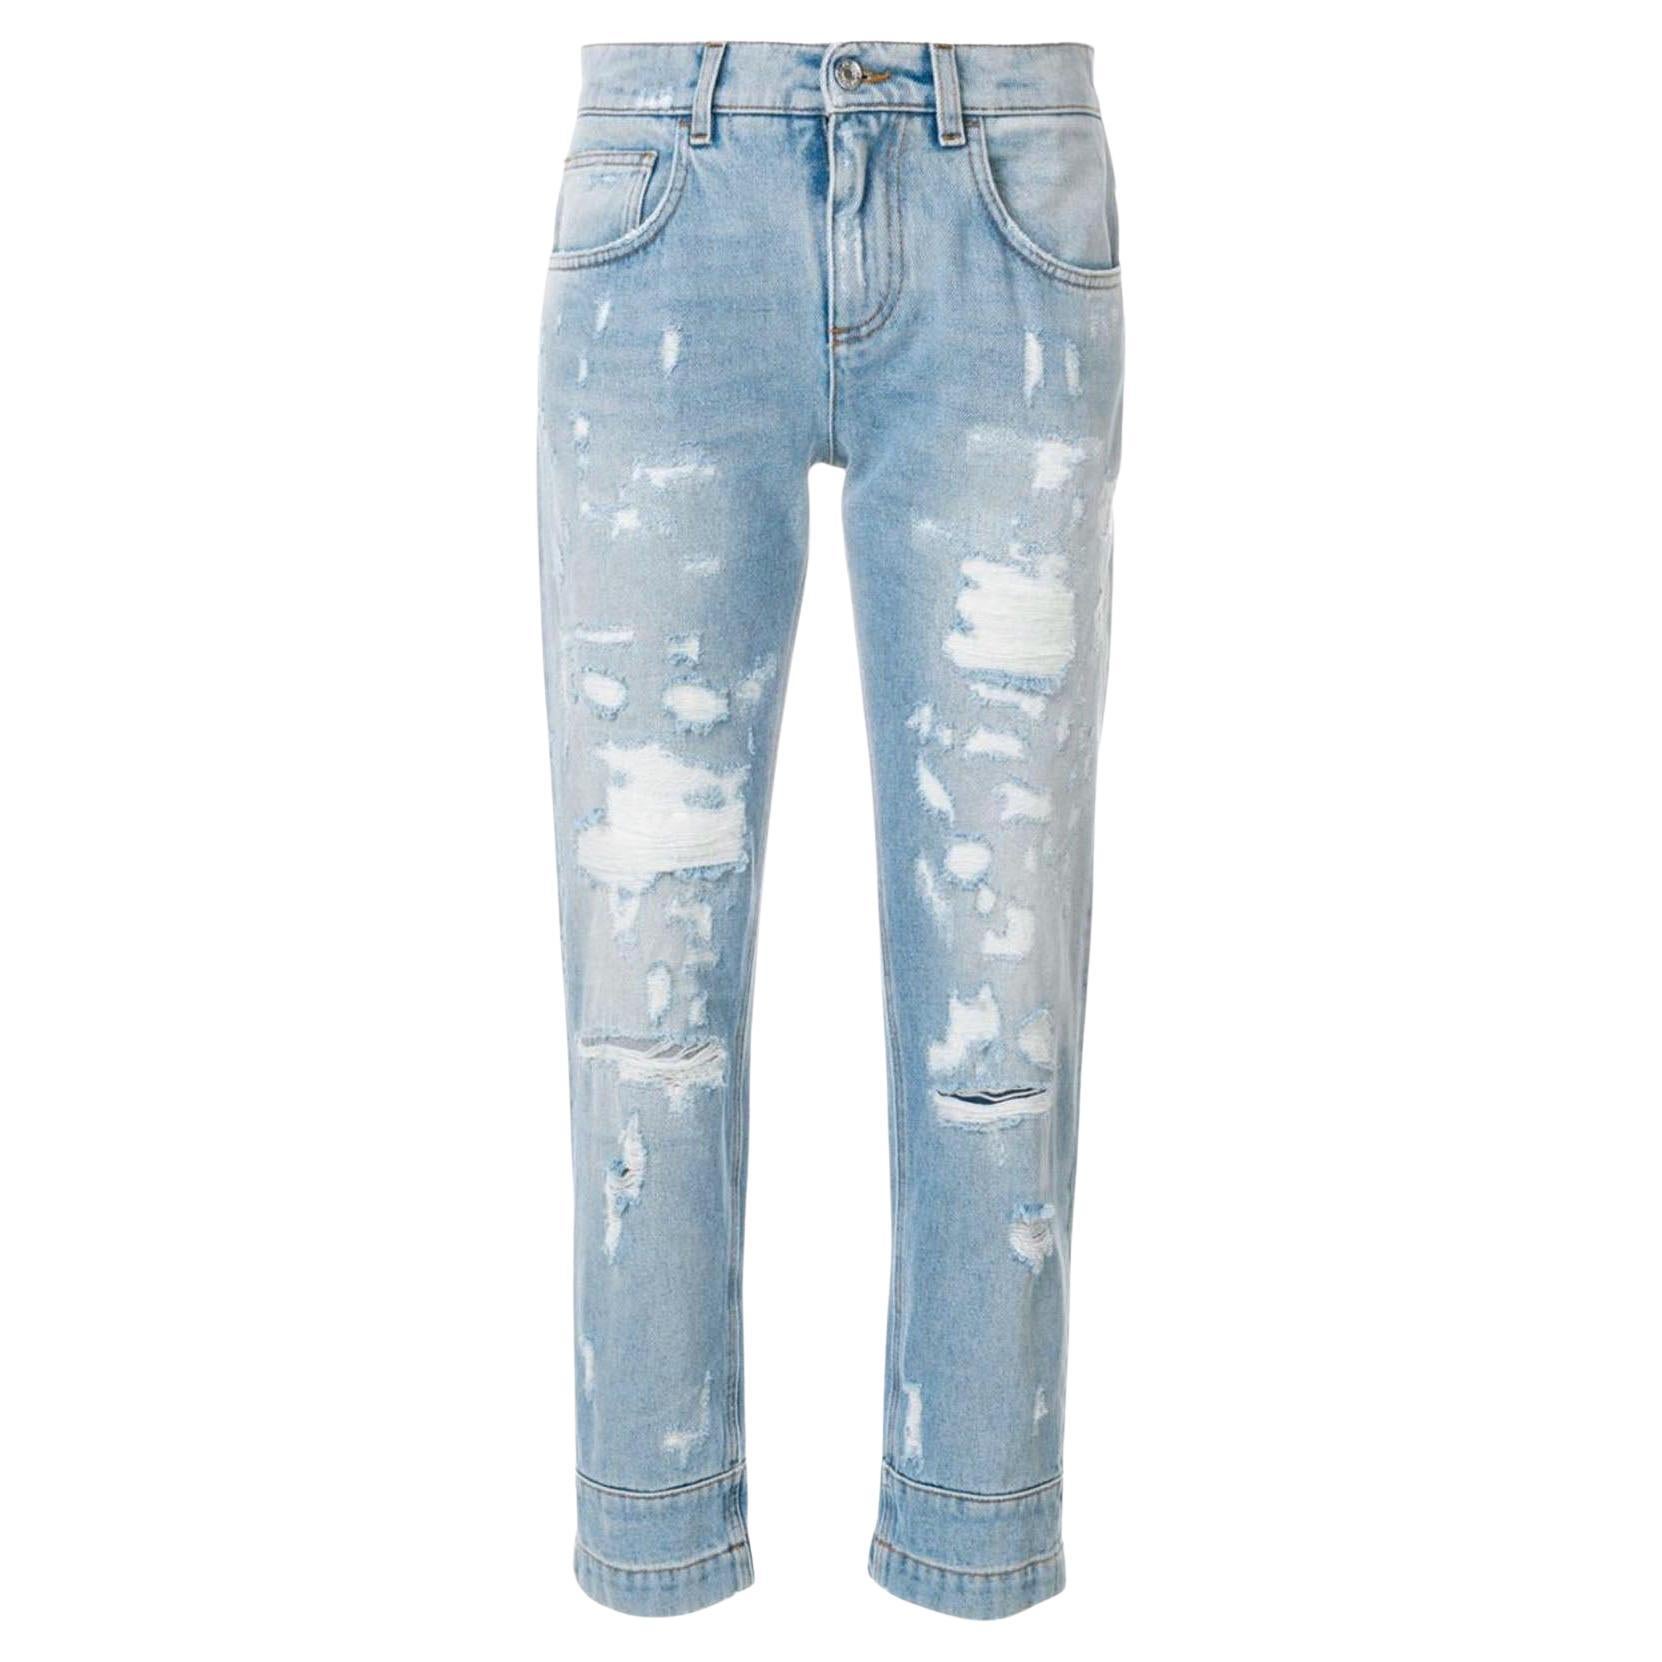 Dolce & Gabbana Blue Ripped Cotton Mid Waist Cropped Jeans Boyfriend Fit Slim For Sale